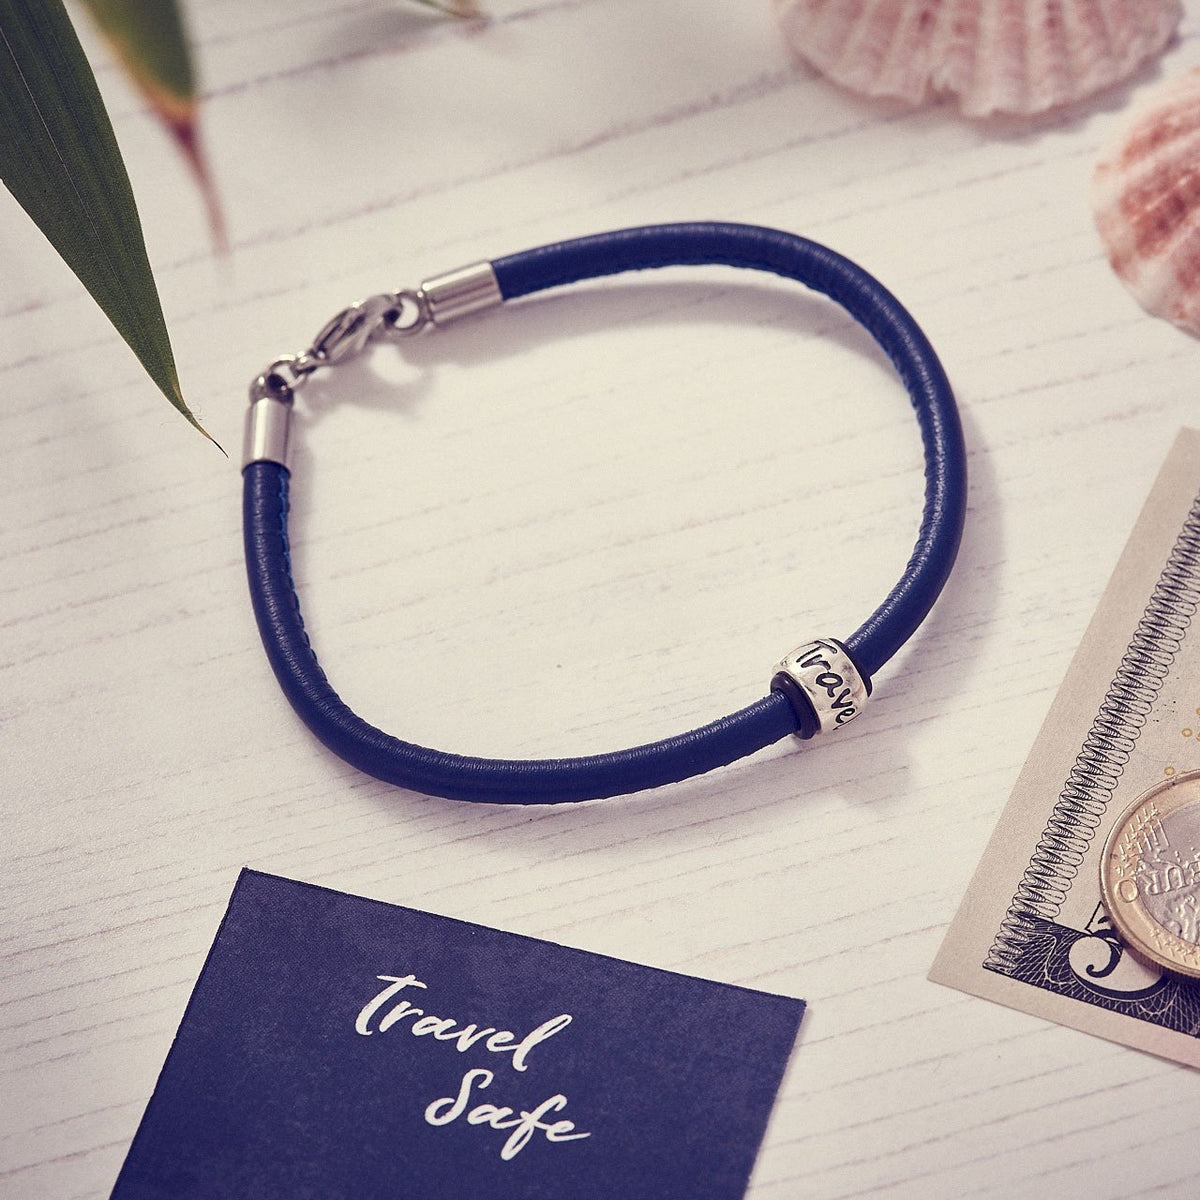 Travel Safe Silver &amp; Italian Stitched Leather Bracelet Navy Blue - alternative travel gift from Off The map Brighton